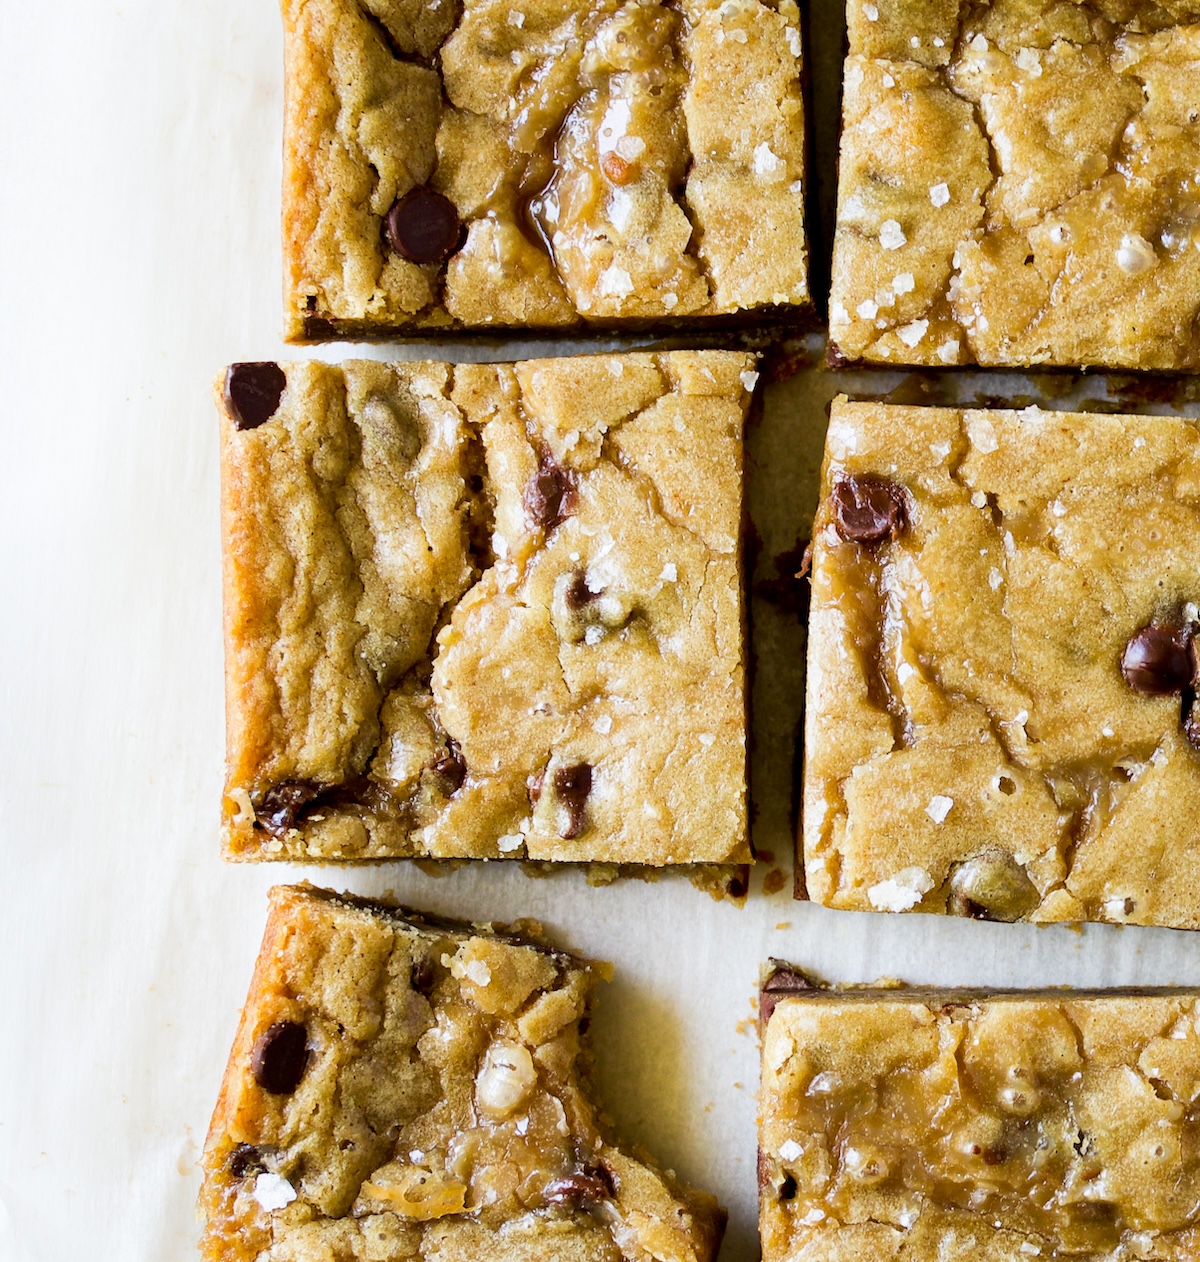 Caramel Blondies with chocolate chips, sea salt flakes and caramel baked into the blondies.